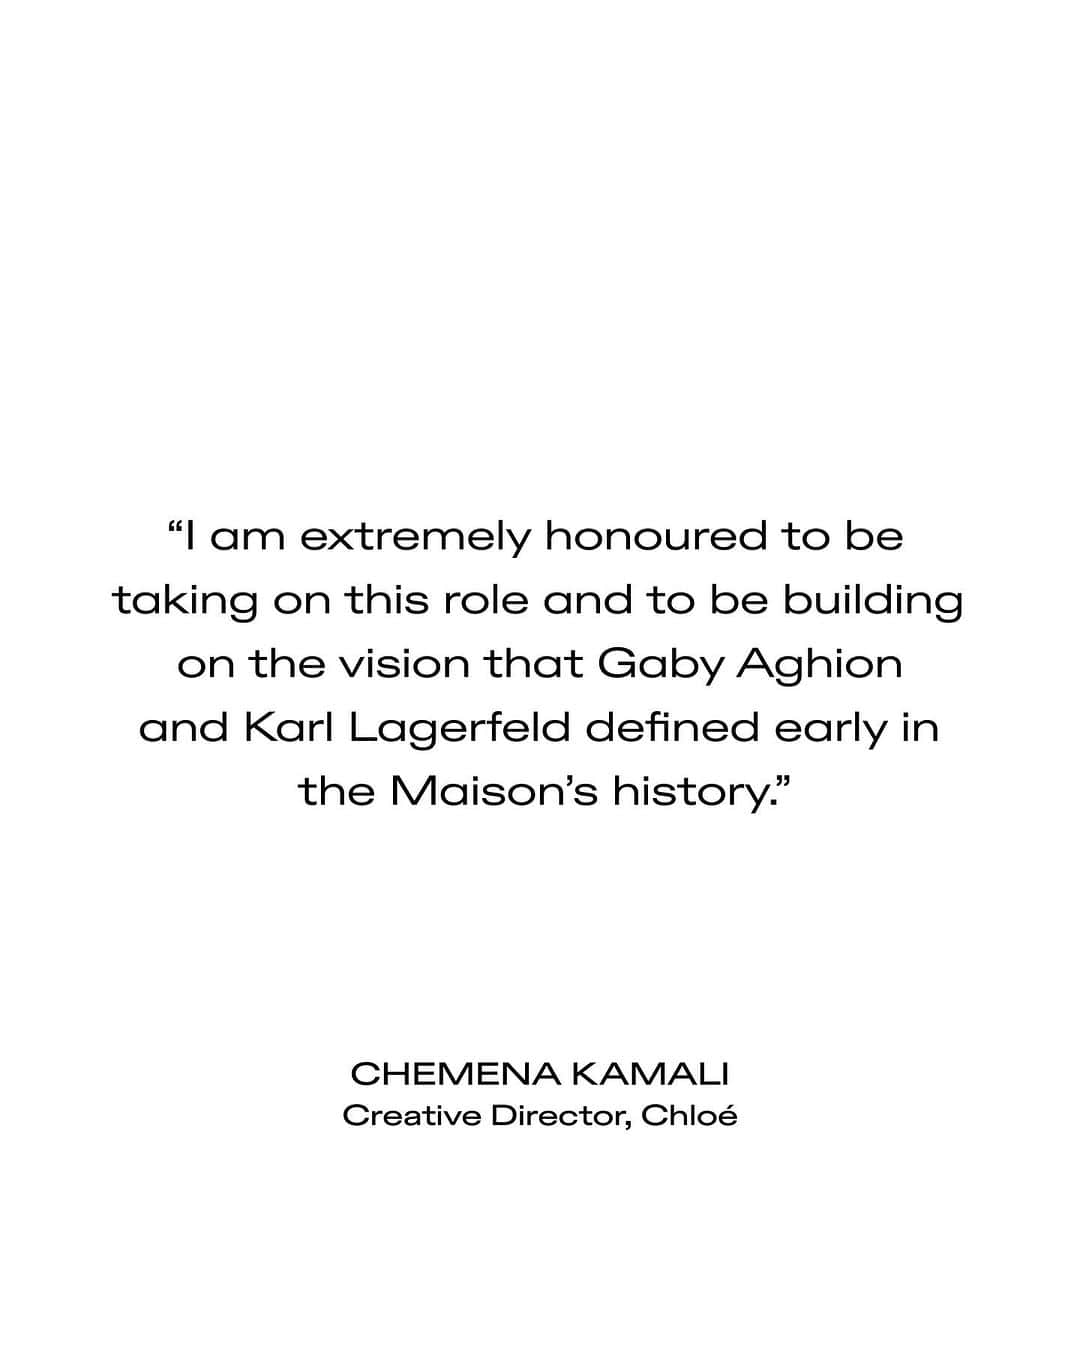 Chloéさんのインスタグラム写真 - (ChloéInstagram)「Chloé announces today that Chemena Kamali joins the Maison as Creative Director. ​ ​ Born in Germany in 1981, @Chemena Kamali undertook a Master of Arts in Fashion at Central Saint Martin’s University of the Arts in London under Professor Louise Wilson. Chemena graduated with distinction in 2007. The highly accomplished German designer has over two decades of experience including a long tenure with Chloé. She began her career at the Maison as part of Phoebe Philo’s team and later rejoined as Design Director to Clare Waight Keller in 2013. Most recently, from 2016, she was Women’s Ready to Wear Design Director for Anthony Vaccarello at Saint Laurent. ​ ​ The appointment of Chemena Kamali as Chloé’s new Creative Director marks a meaningful return for her and the Maison.​ ​ “I am proud to welcome Chemena Kamali to Chloé. Her extraordinary creative talent, extensive experience and unique connection with the brand’s legacy and values make her a natural choice for the Maison. Chemena’s vision, inspired by her love for the brand, will truly celebrate Chloé’s unique DNA. Chemena is both the Creative Director of Chloé and the embodiment of the Chloé spirit. I am excited to see her vision come to life.” – Riccardo Bellini, President & CEO of Chloé. ​ ​ “My heart has always been Chloé’s. It has been since I stepped through its doors more than 20 years ago. Returning feels natural and very personal. I am extremely honoured to be taking on this role and to be building on the vision that Gaby Aghion and Karl Lagerfeld defined early in the Maison’s history. I hope to capture the emotional connection and spirit of Chloé for today. I am very grateful to Riccardo Bellini, Philippe Fortunato and Johann Rupert for this opportunity and their trust.” – Chemena Kamali, Creative Director of Chloé. ​   Chemena Kamali will present her first pre-collection for Chloé in Paris in January 2024, followed by her Fall-Winter 2024 collection during Paris Fashion Week in February 2024. ​」10月9日 14時03分 - chloe